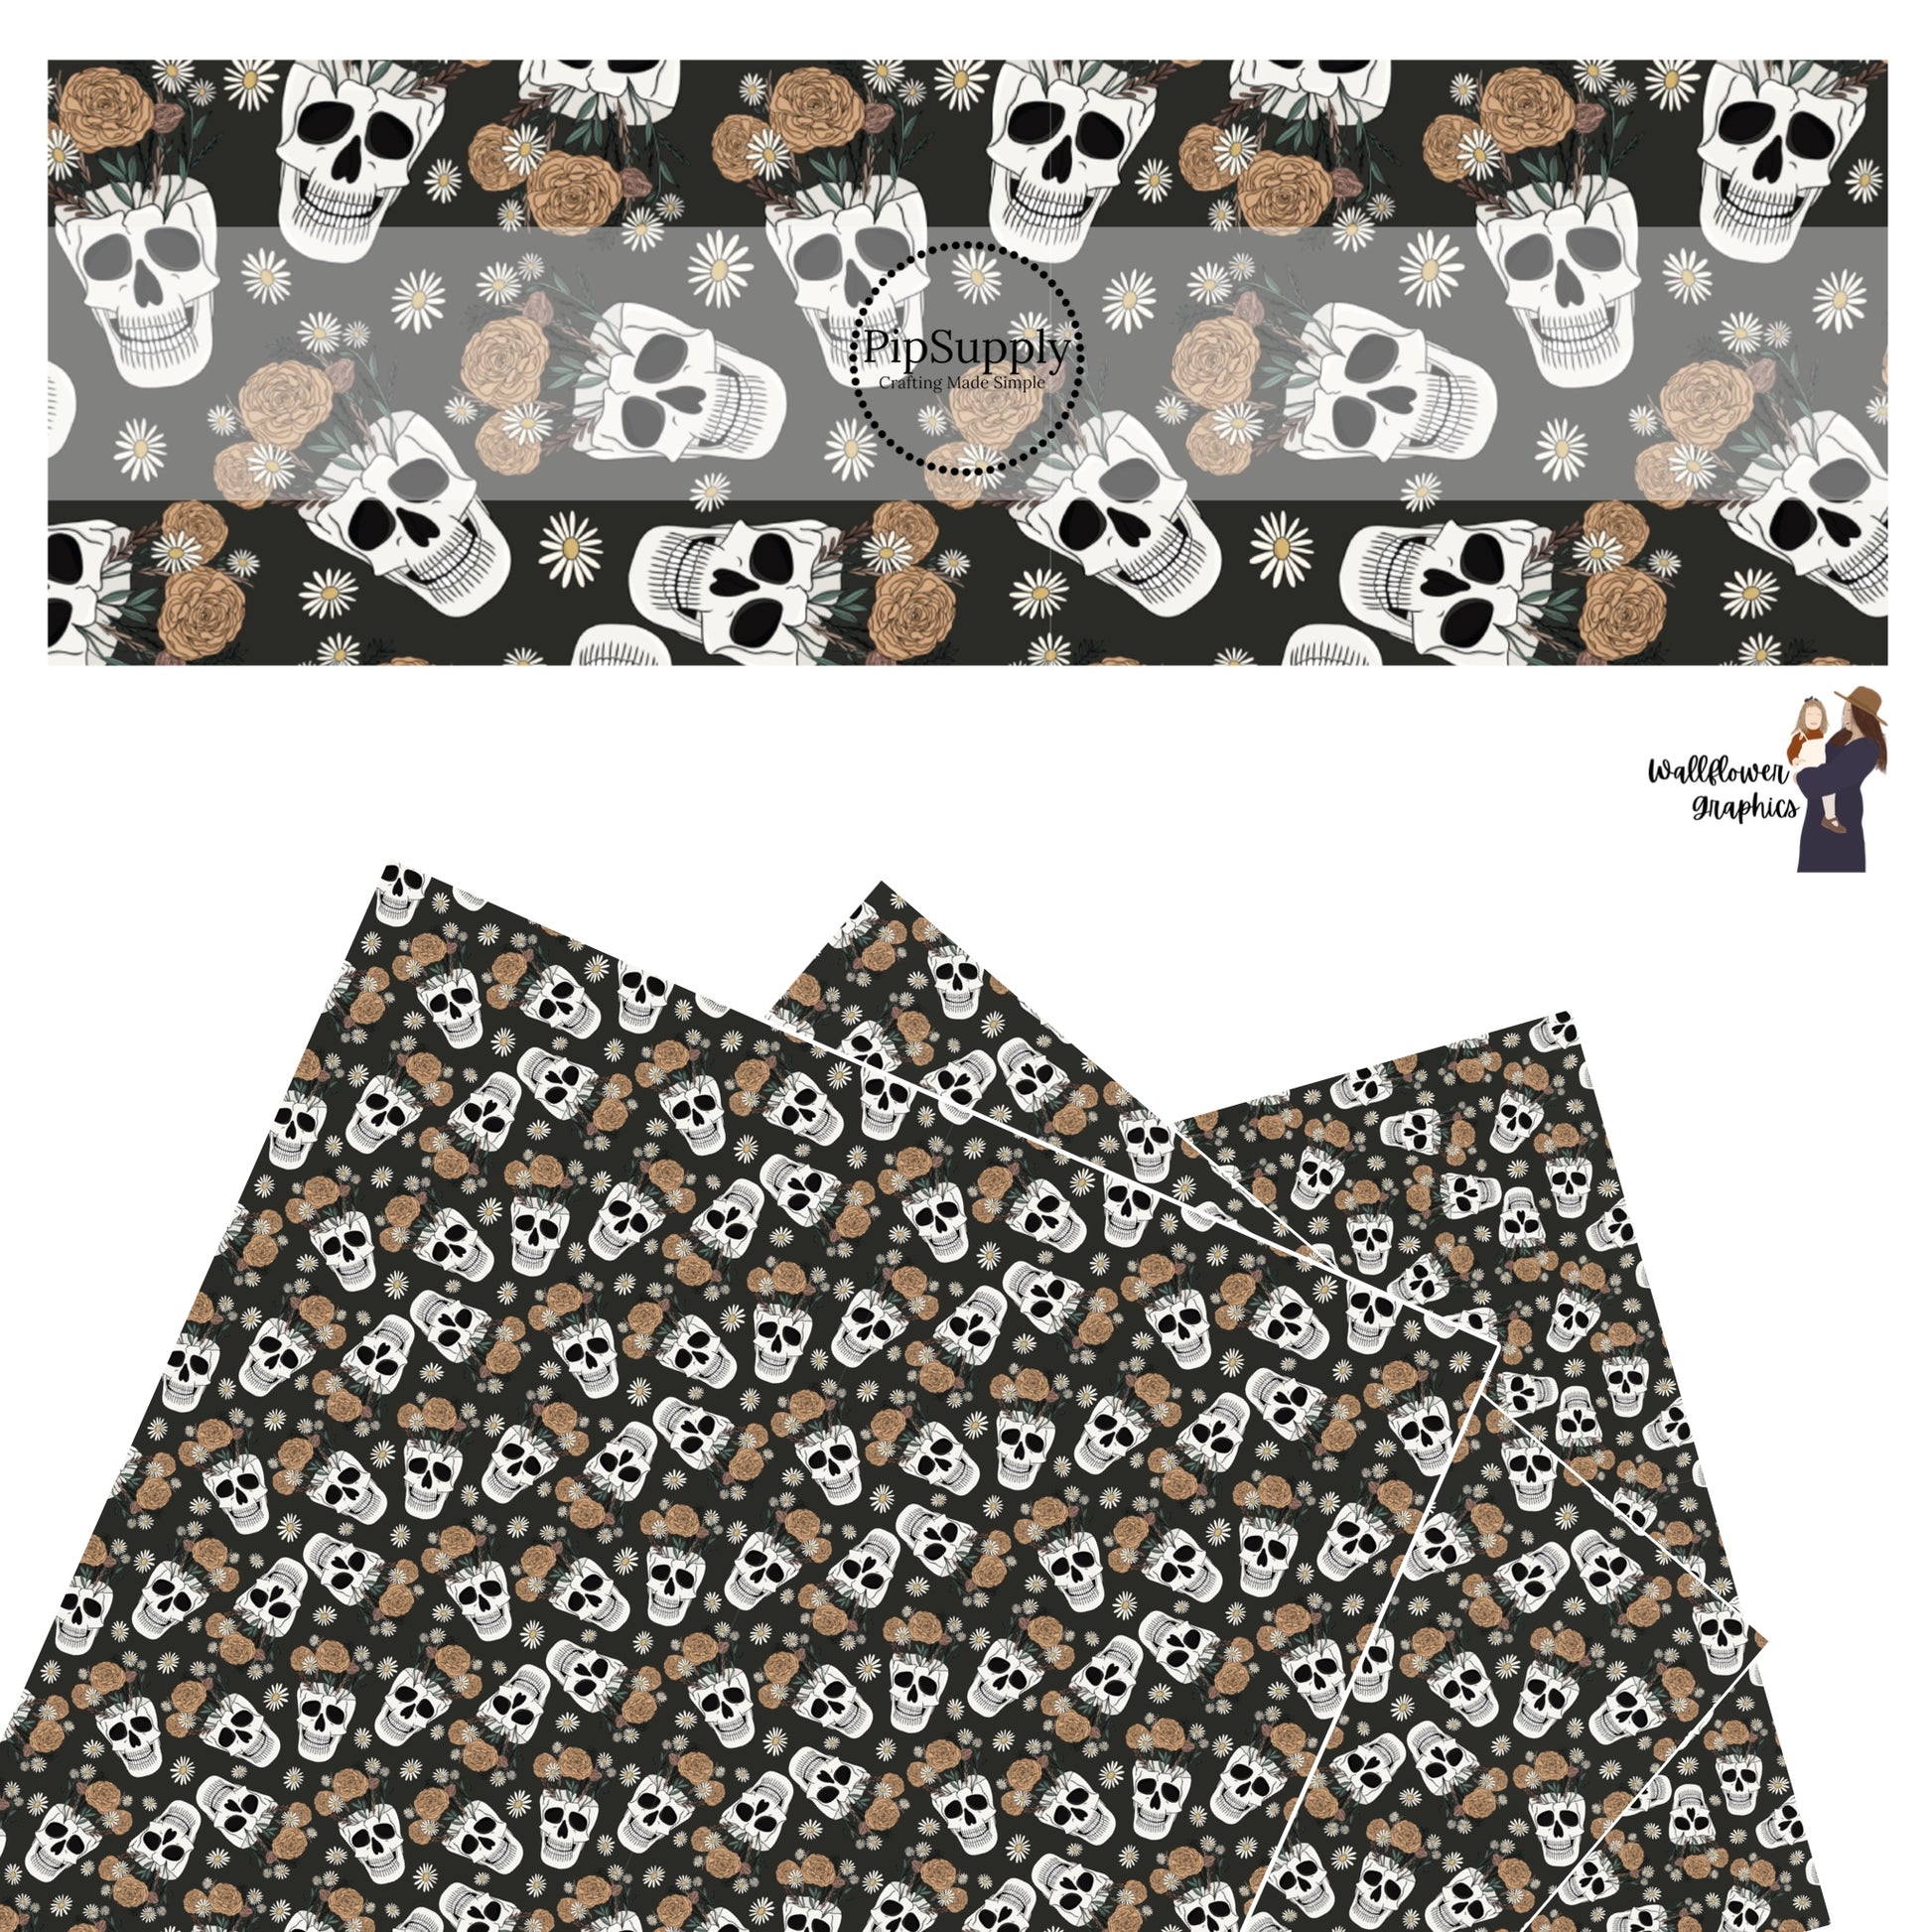 Skulls with flowers on black faux leather sheets